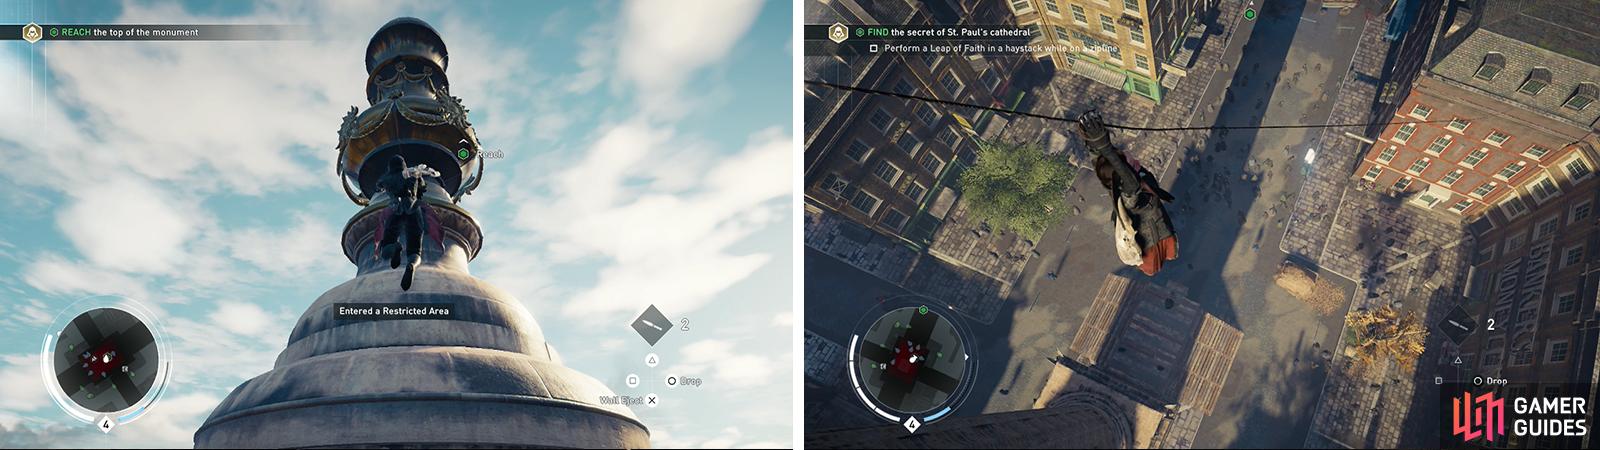 After climbing to the top of the monument (left), use a zipline to perform a leap of faith into a haystack below (right) for the optional objective.